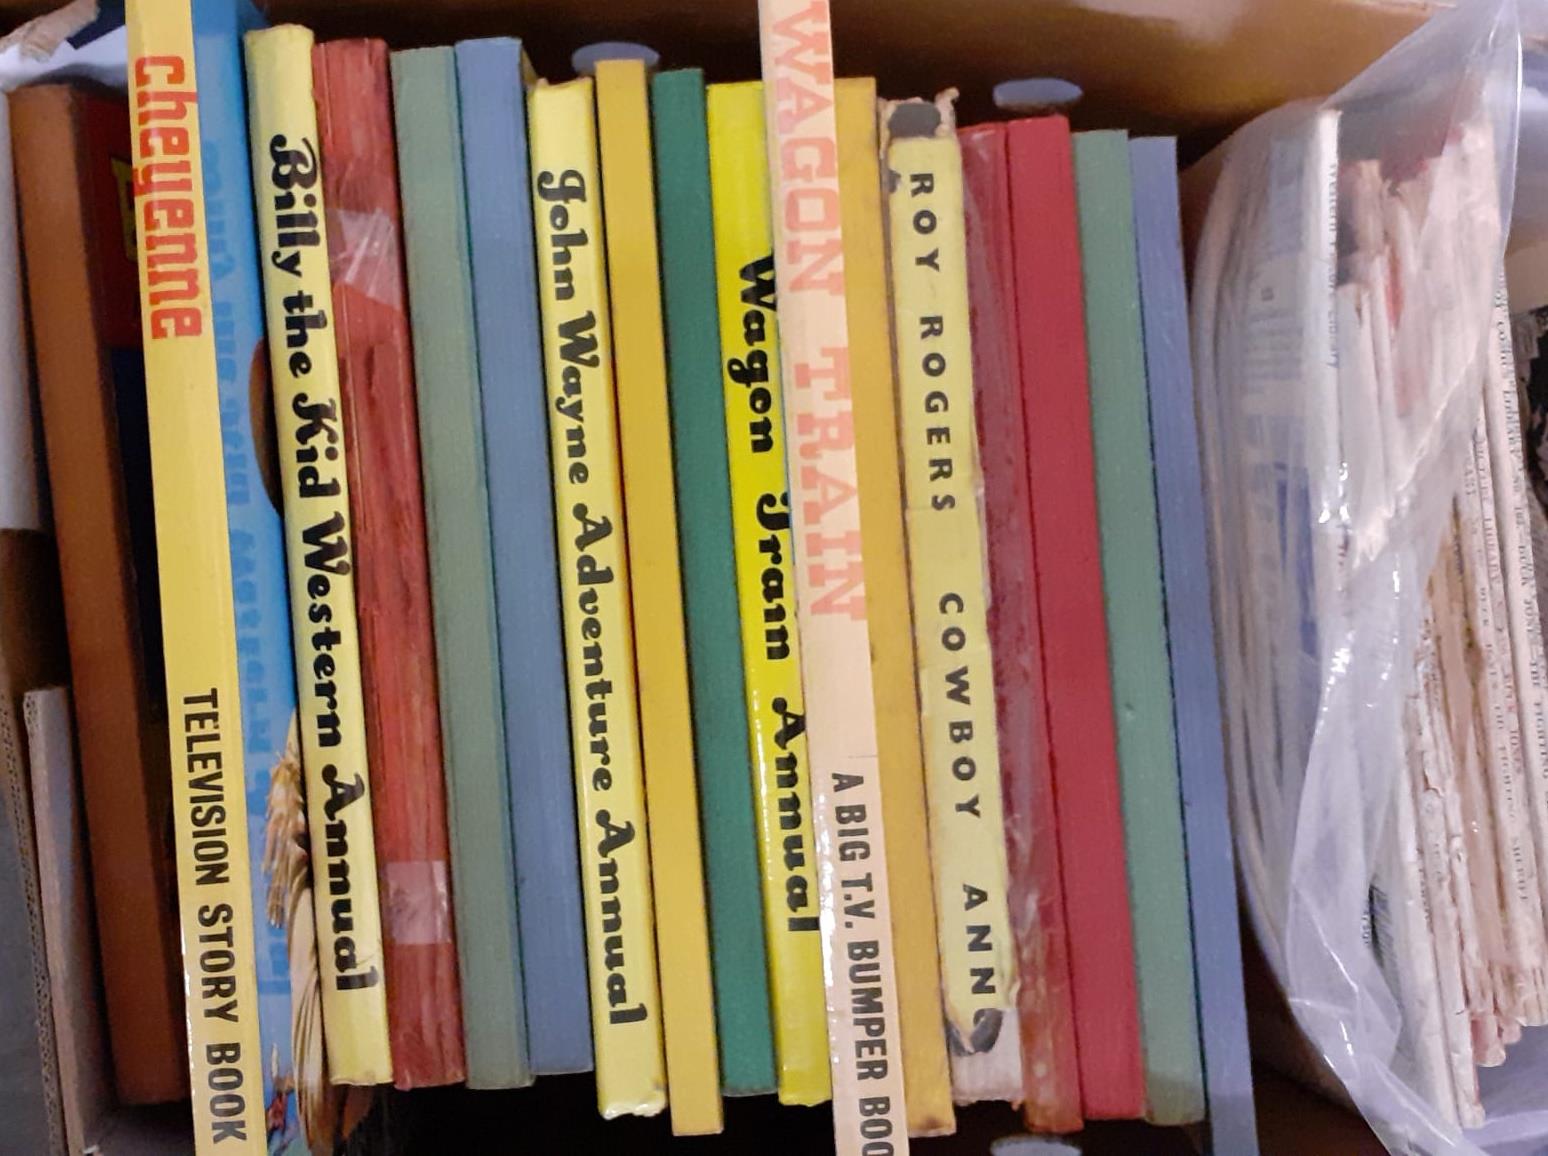 Three boxes of vintage annuals to include: Wagon Train, Superboy, Black Box, Premier Book for